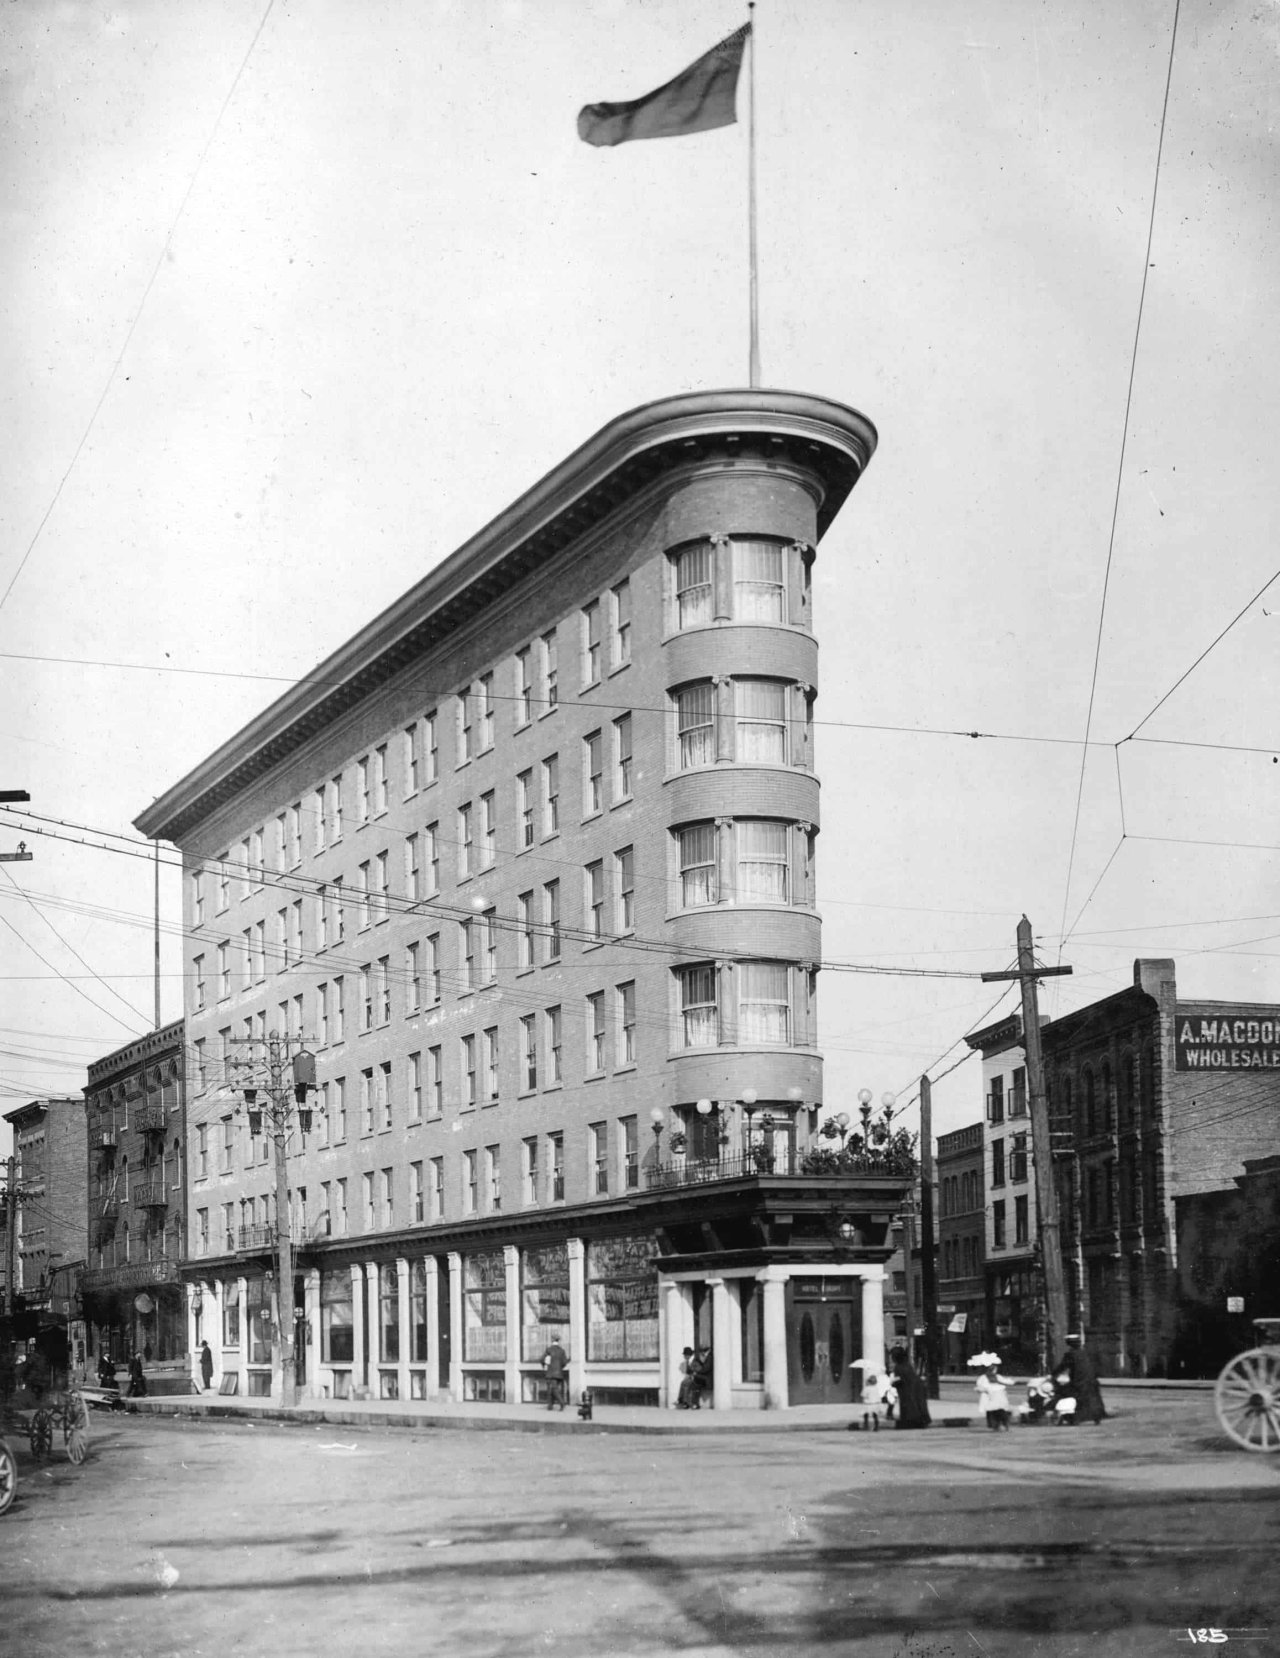 Europe Hotel c. 1910s. Source: City of Vancouver Archives M-11-32